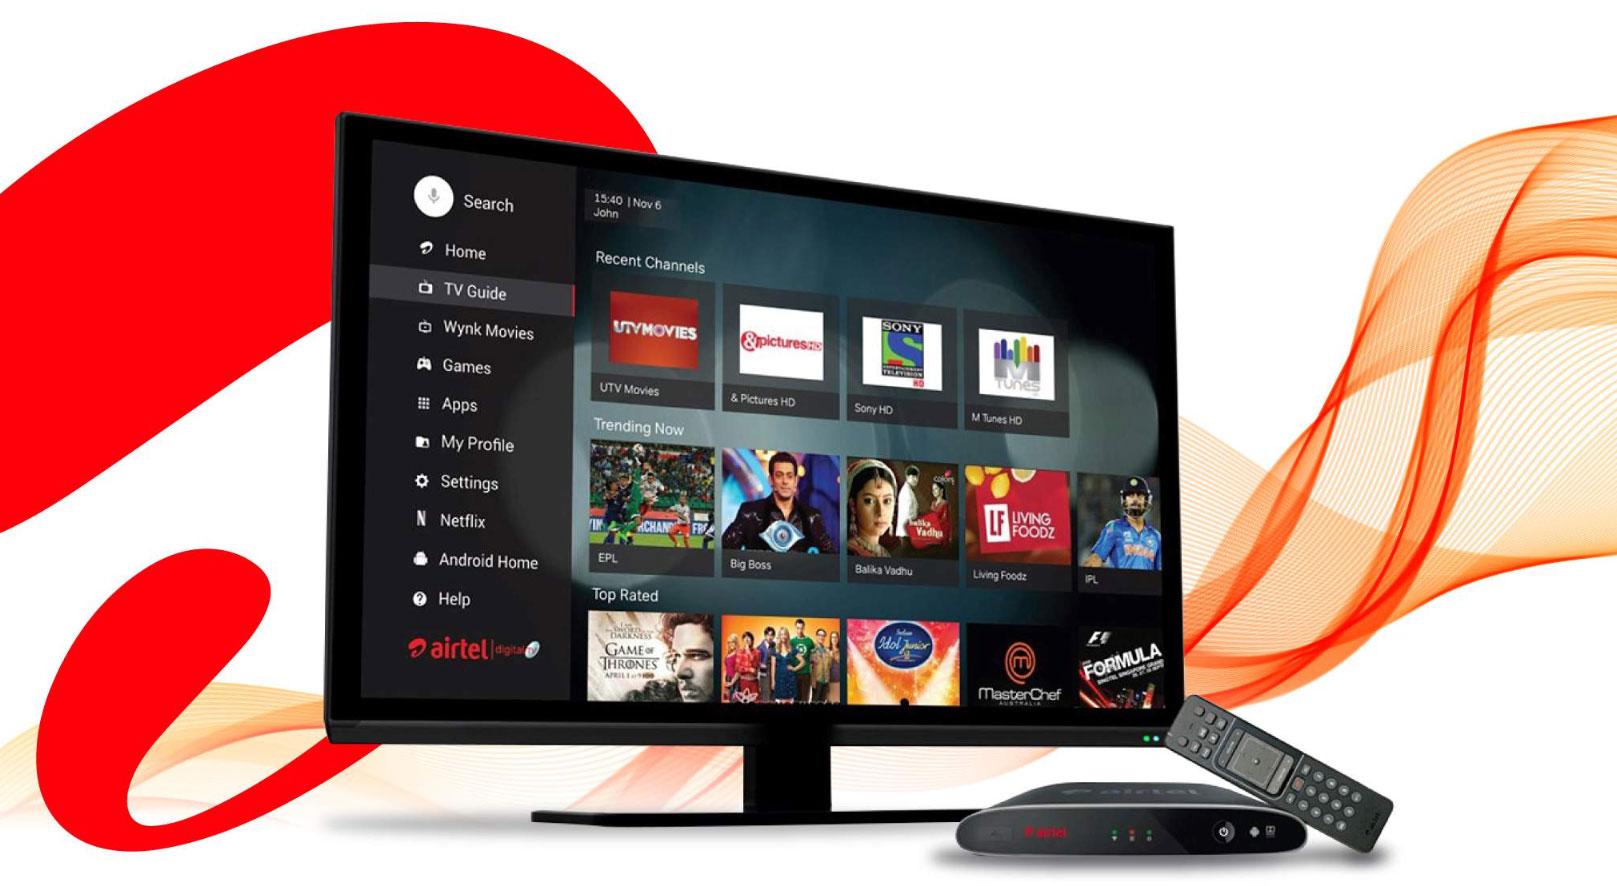 India’s first Hybrid DTH set-top box powered by Android TV